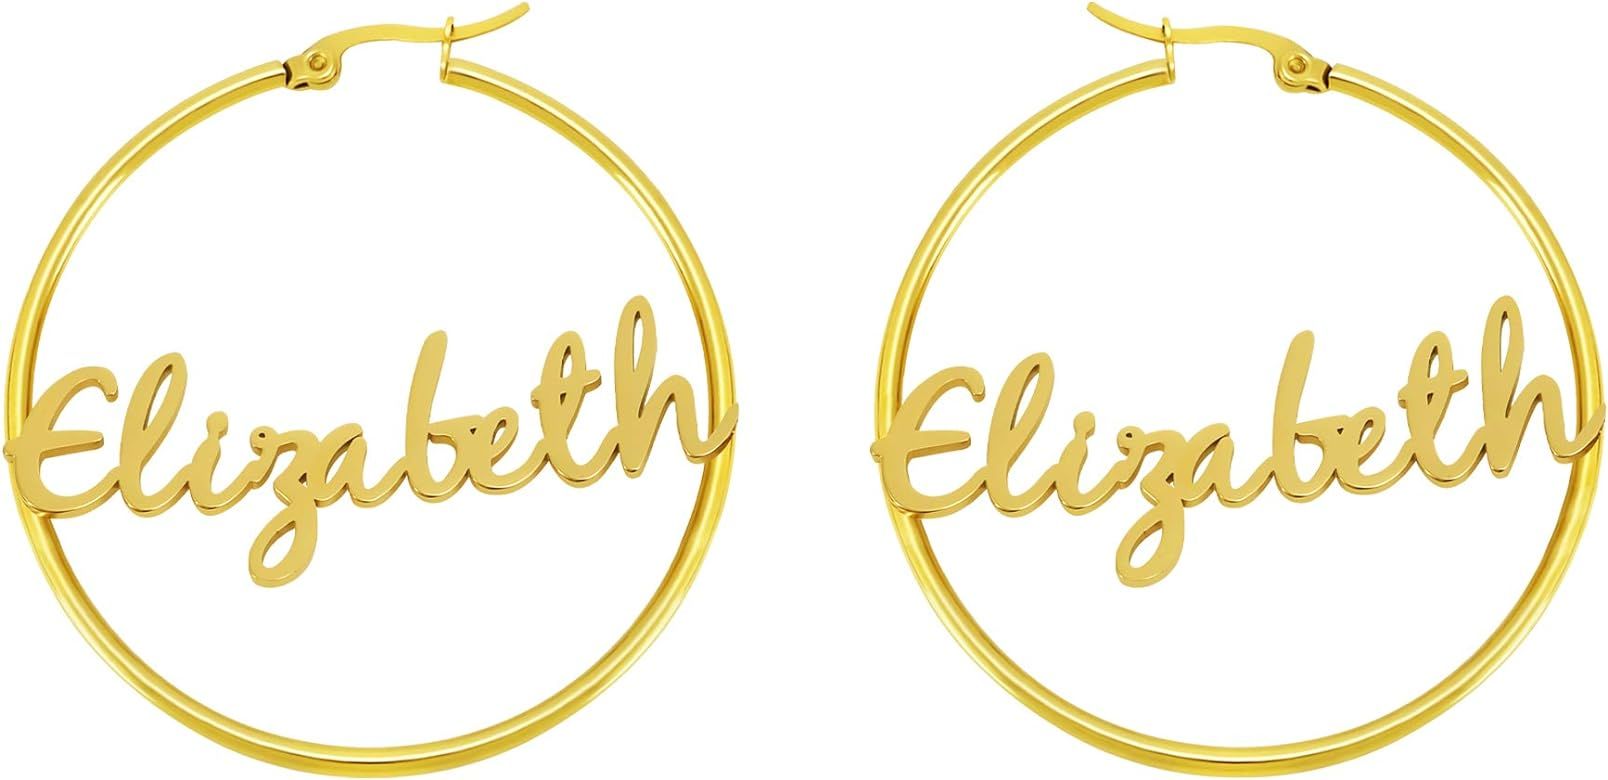 Personalized Gold Name Hoops Earrings for Women Unique Gifts for Her Birthday Mother's Day Thanksgiv | Amazon (US)